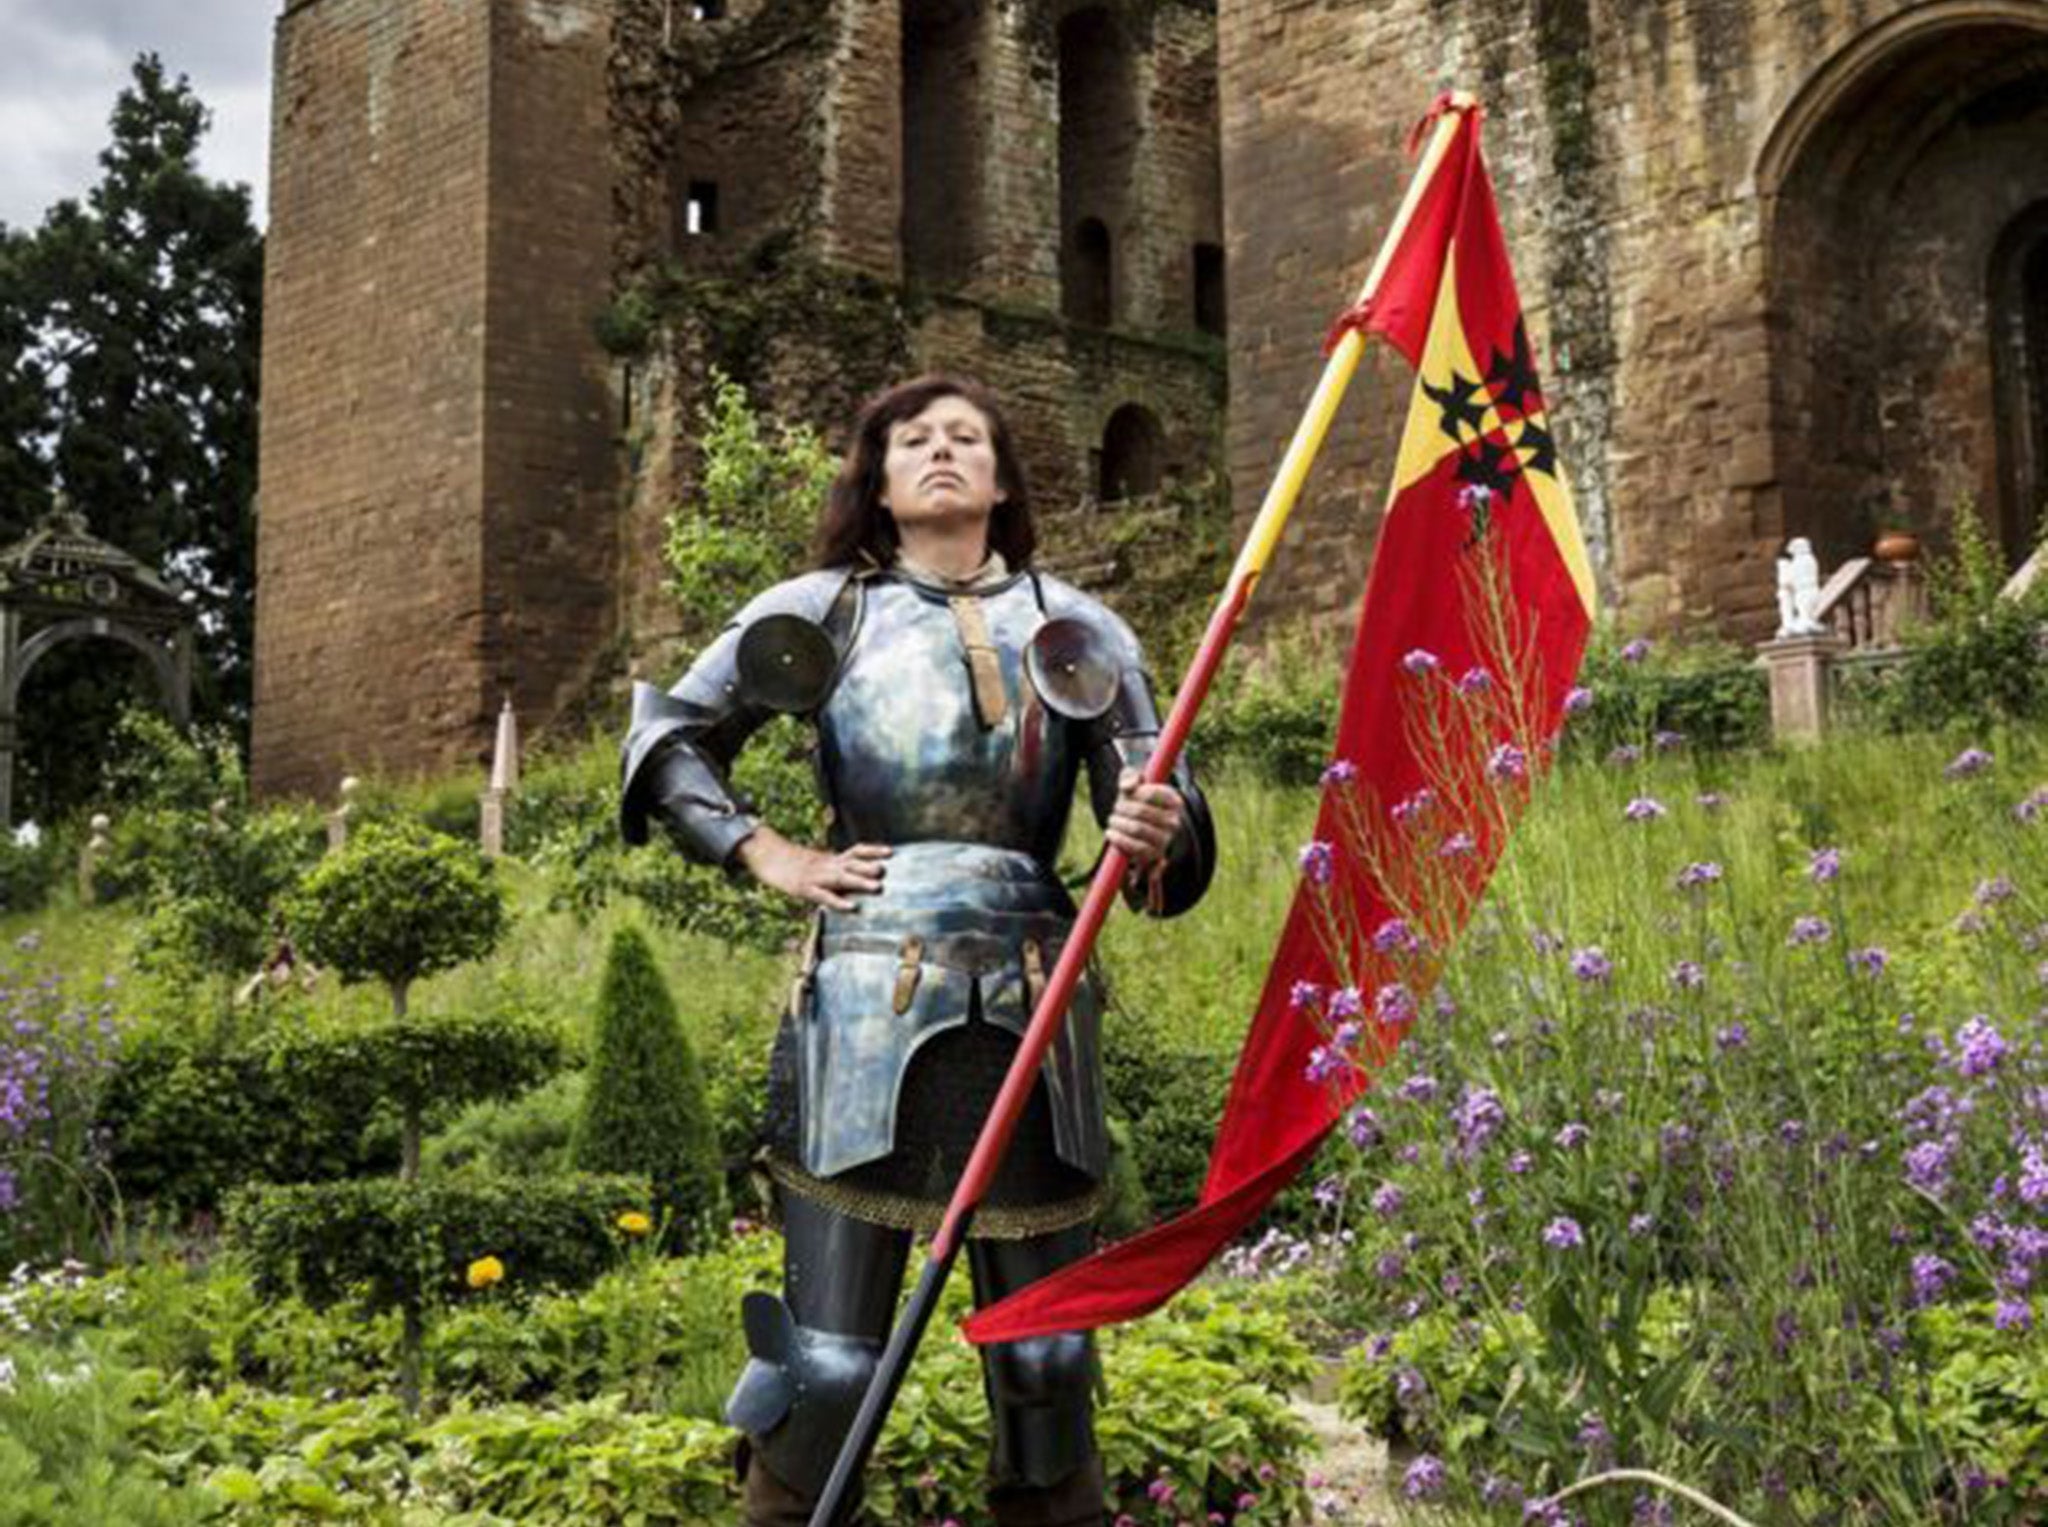 Nicky Willis will be seen jousting at Kenilworth Castle in Warwickshire